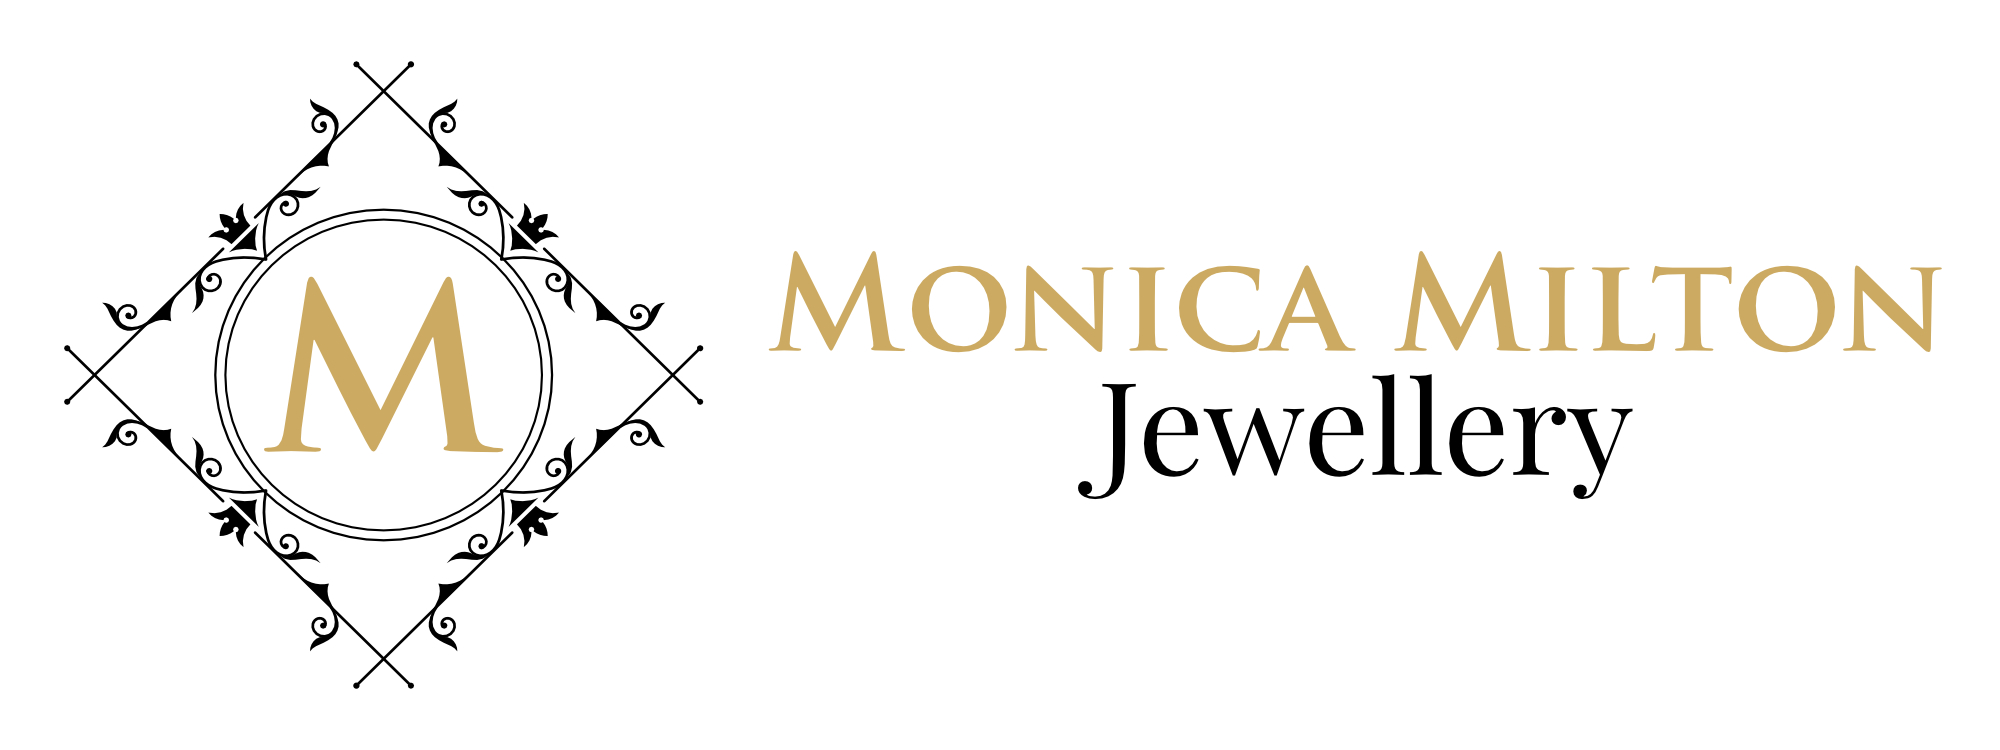 Monica Milton Jewellery - Sterling Silver and Gold Jewellery.